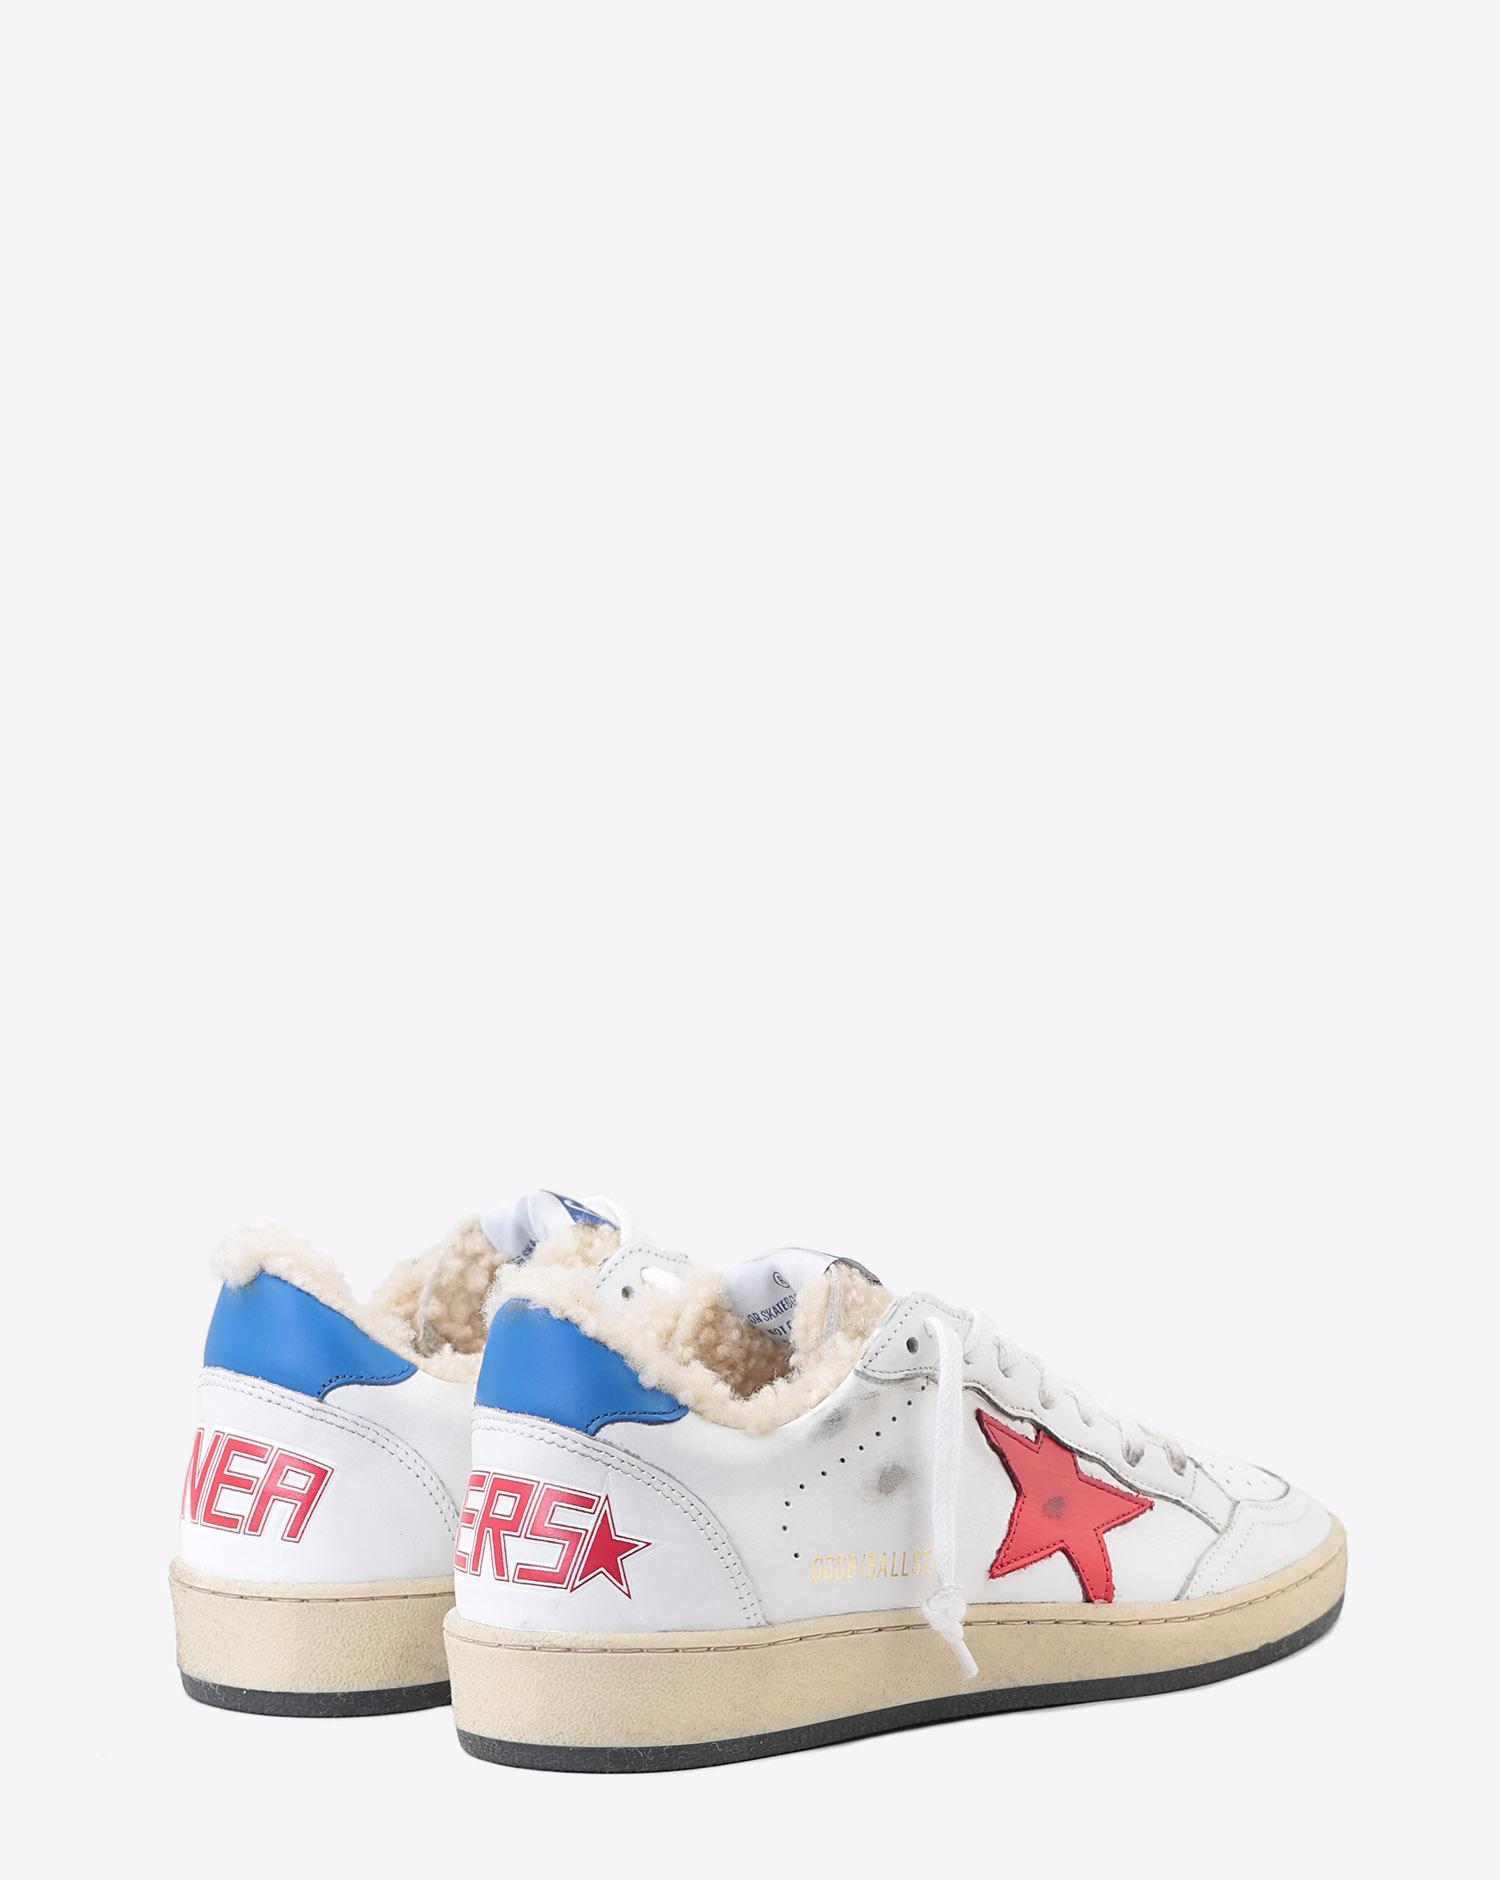 Golden Goose Woman Pré-Collection Sneakers Ball Star - White Shearling - Red Star  